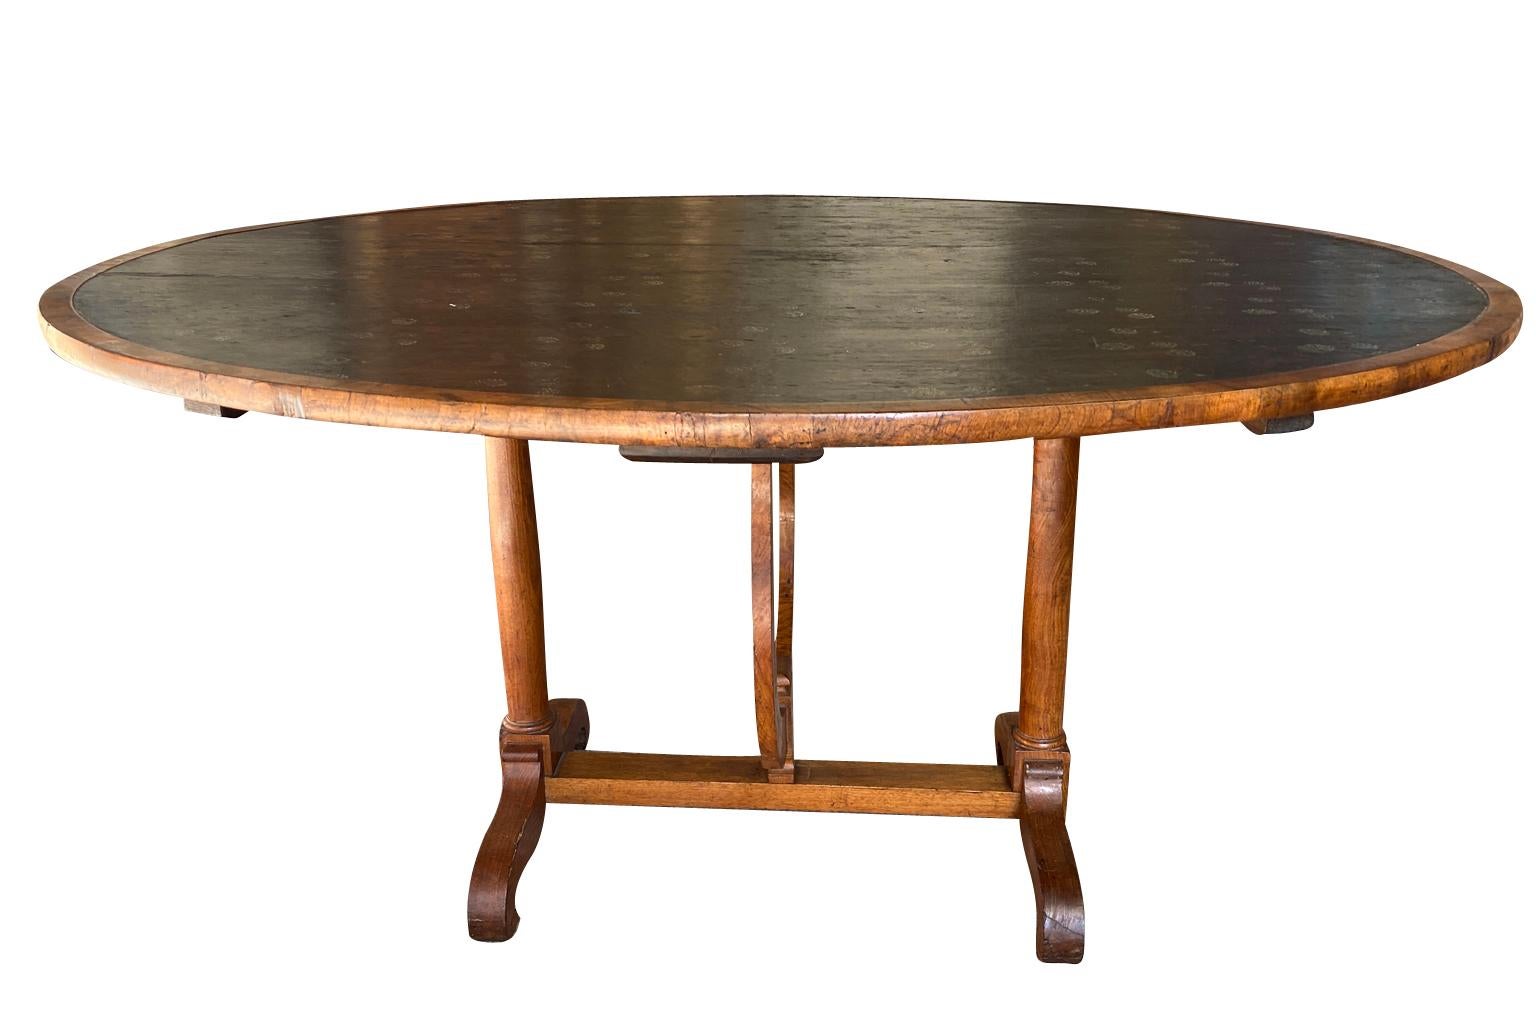 A very lovely early 19th century Oval Shaped Wine Tasting Table - Table Vigneron from the Provence region of France.  Beautifully constructed from walnut with a moleskin top and wonderful pivoting base.  Great patina.